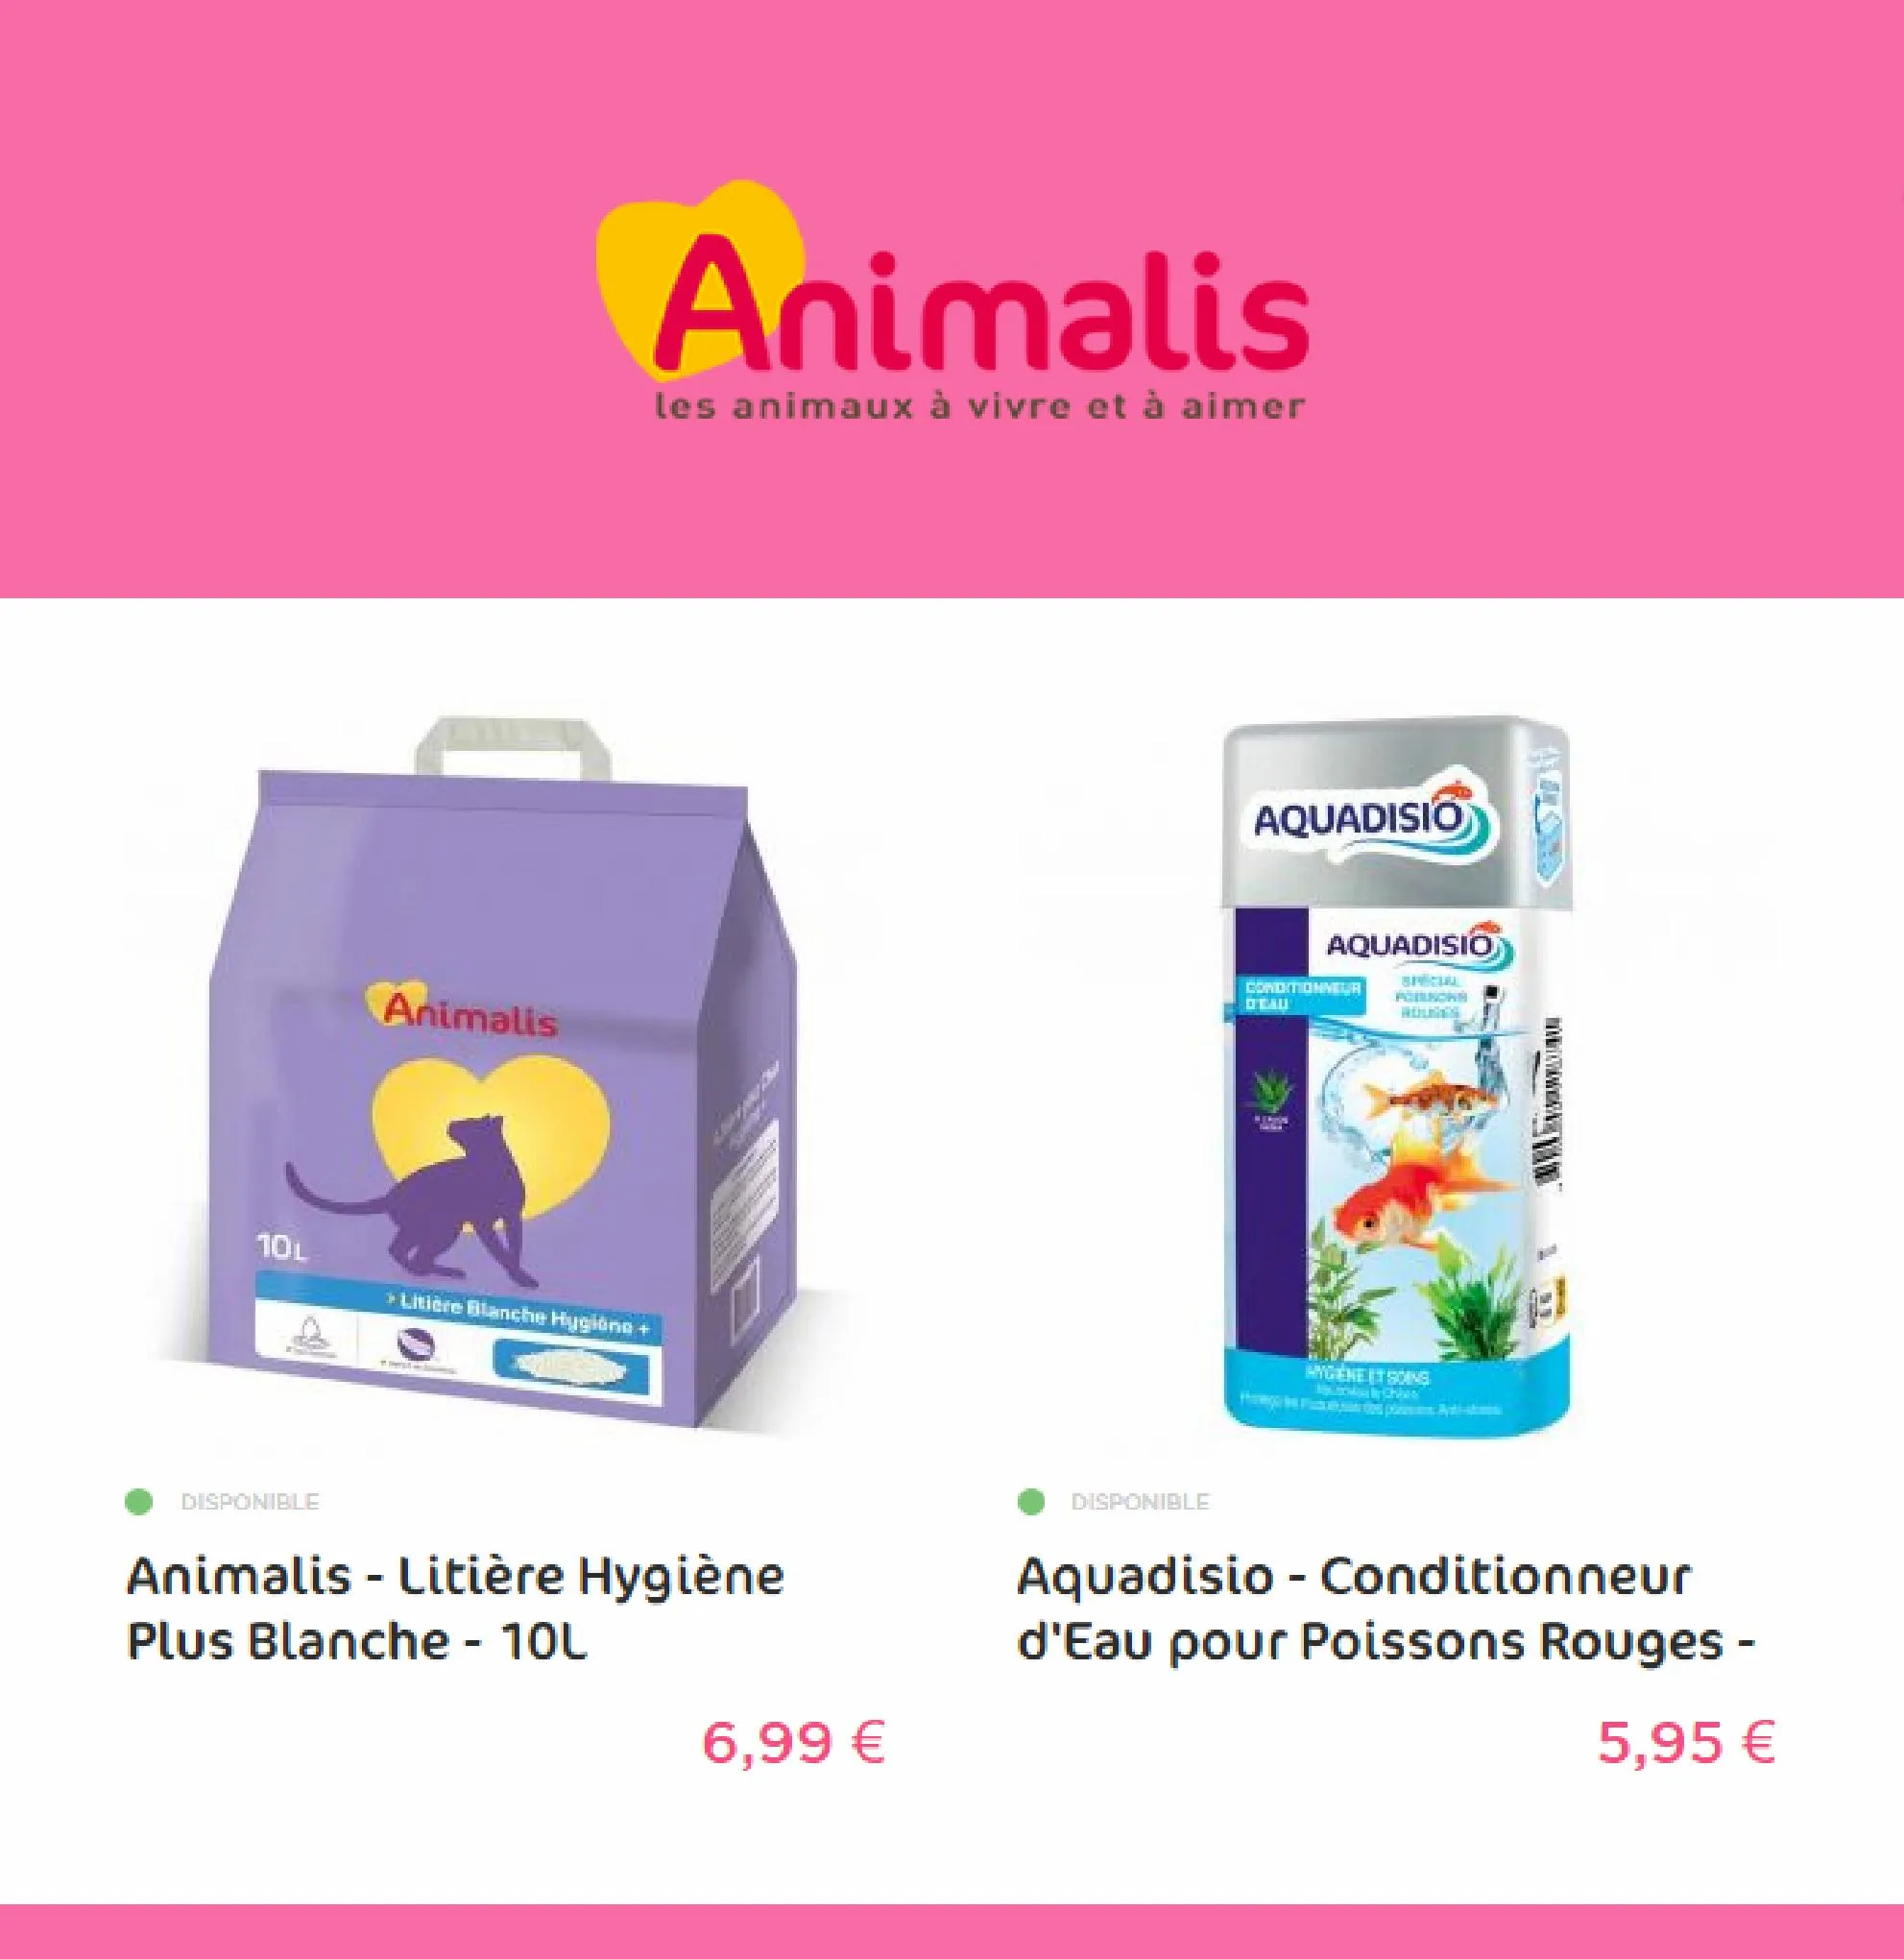 Catalogue Promotions Animalis, page 00001